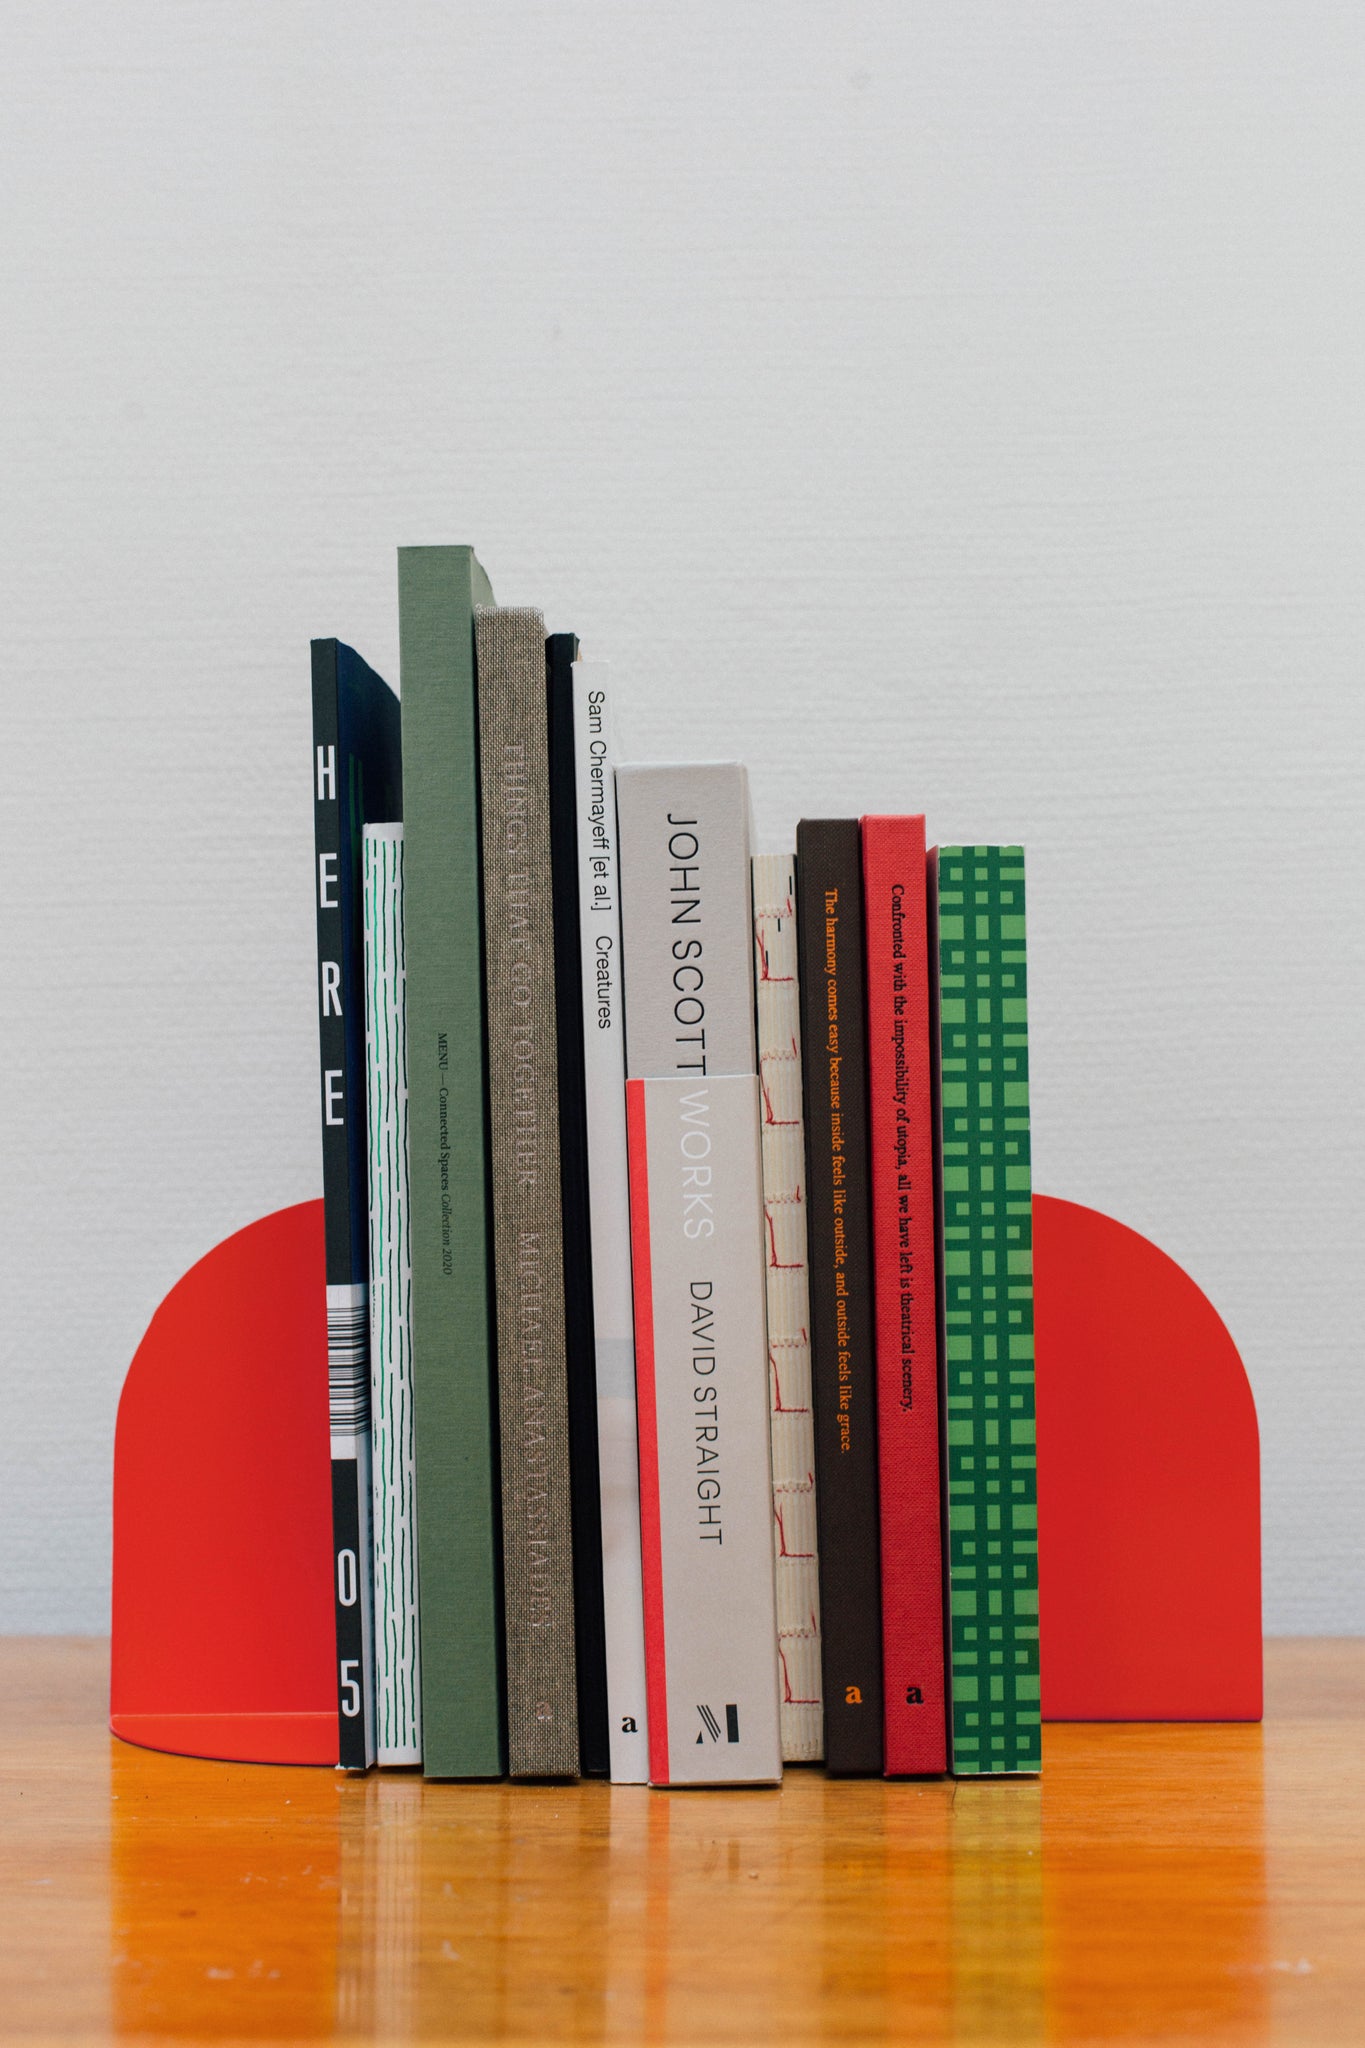 Folded Bookend - Red